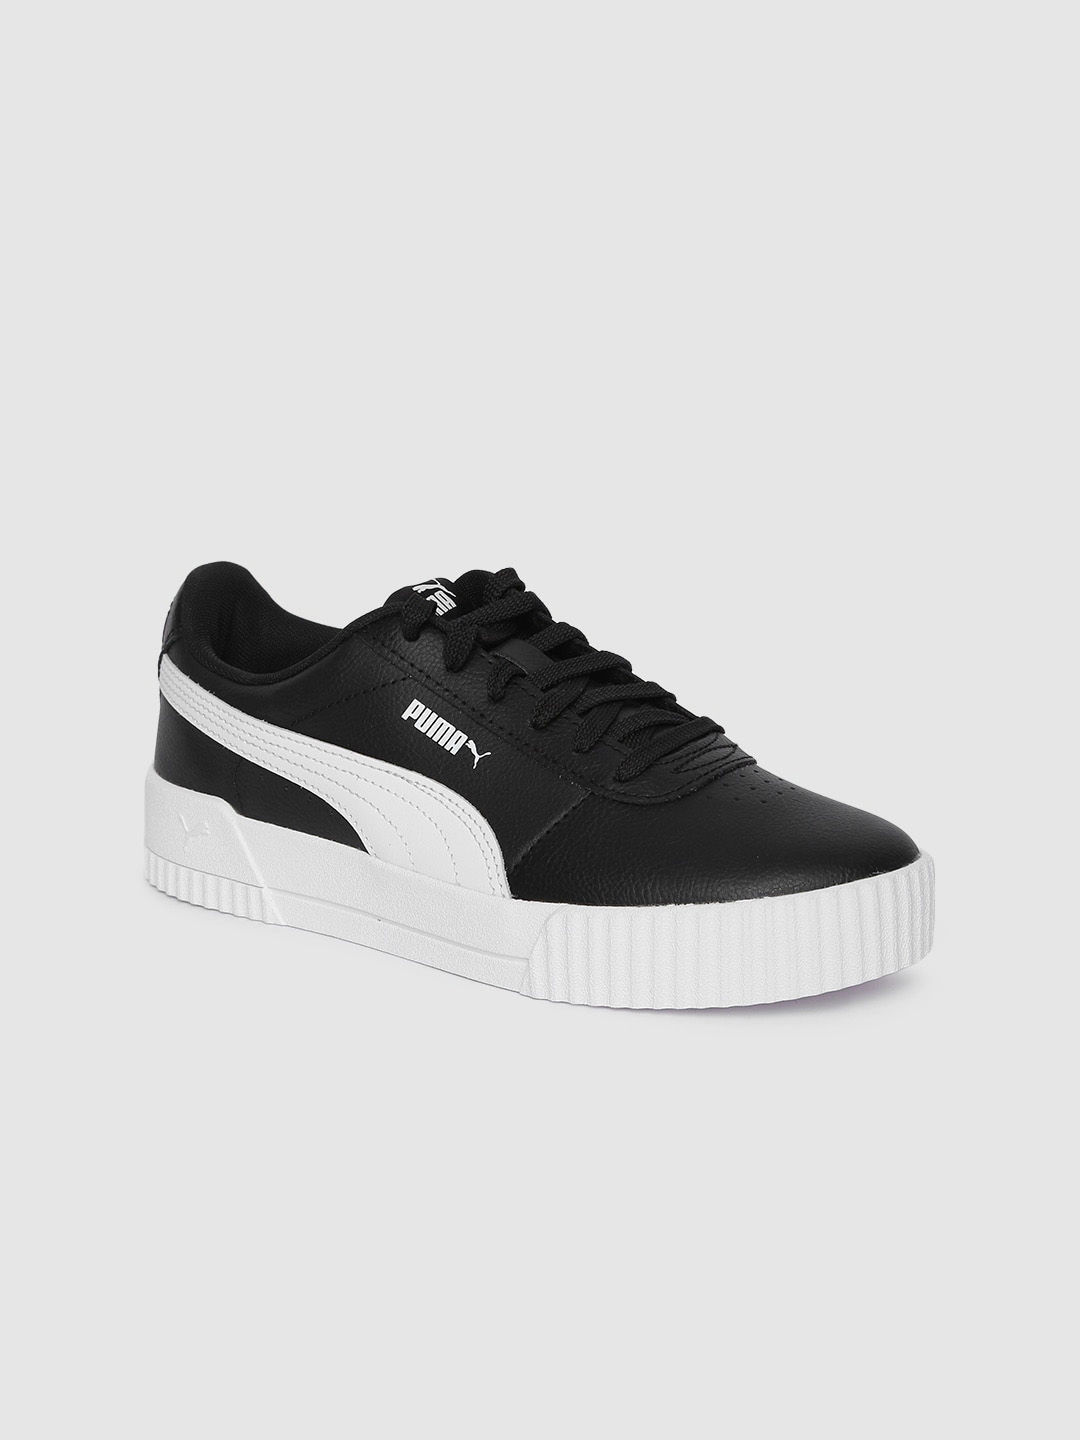 Buy Puma Women Black Carina Leather Sneakers Casual Shoes For Women 11419636 Myntra